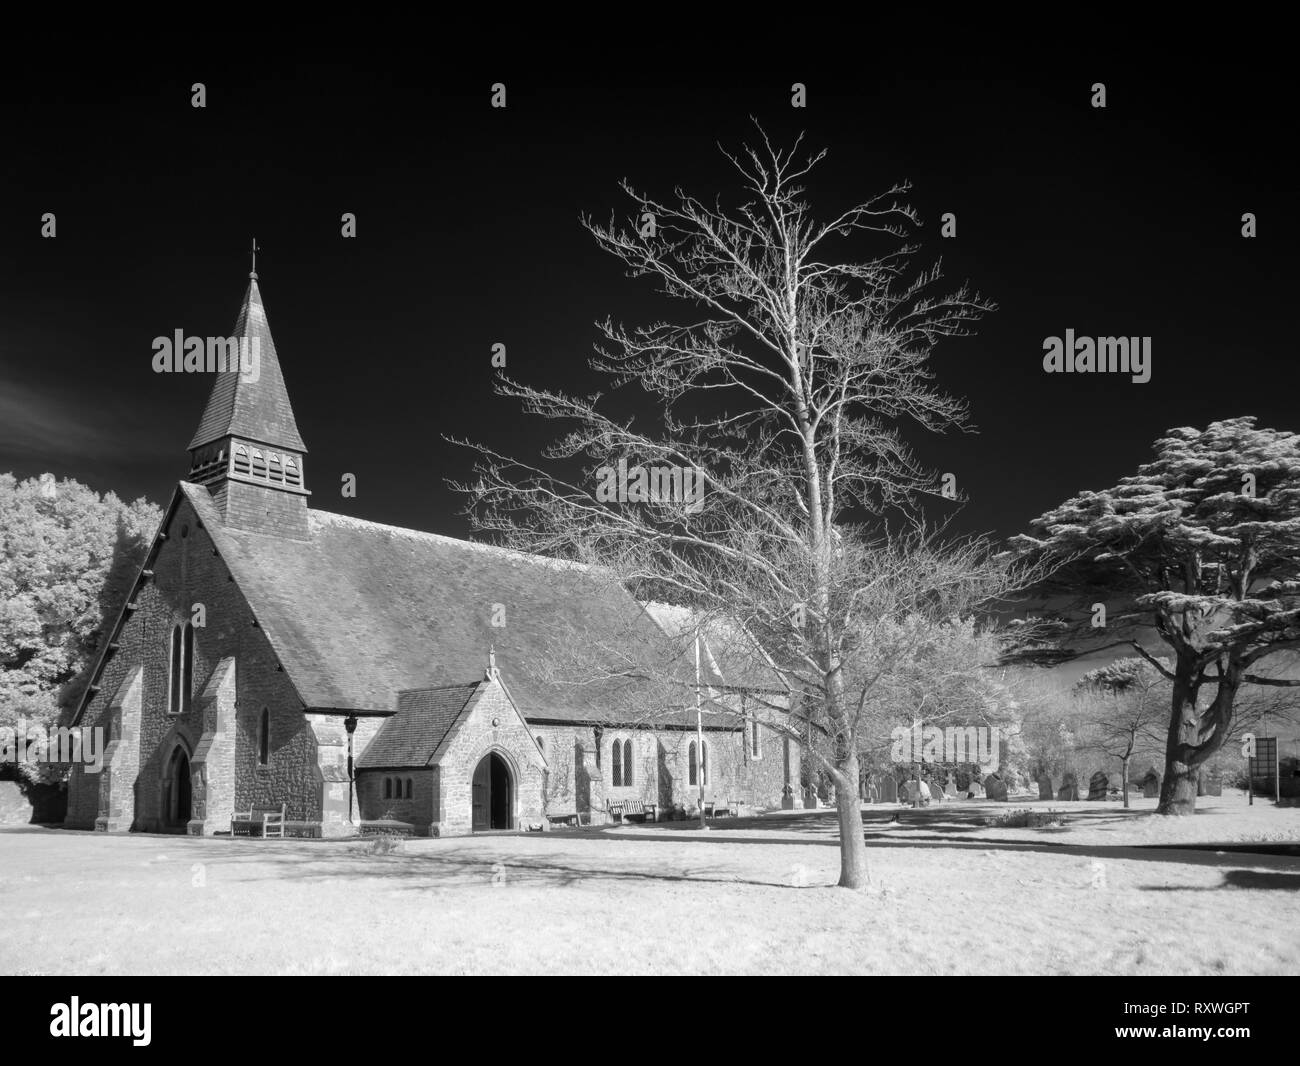 An infrared image of St Peter's Church in the town of Selsey in West Sussex, England. Stock Photo